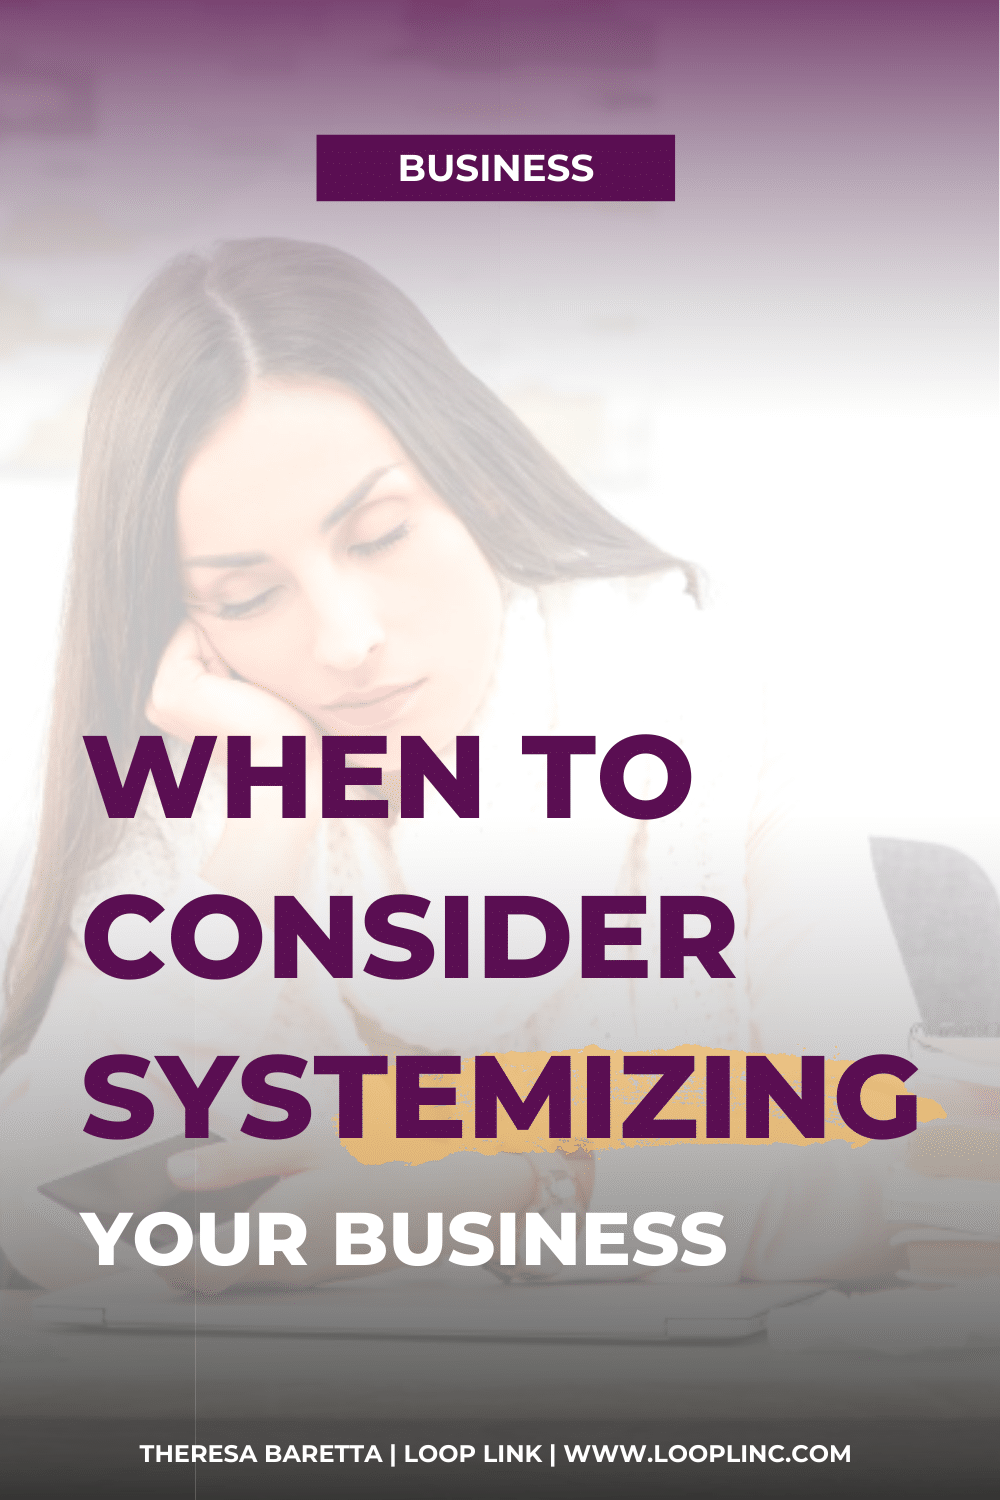 When to Consider Systemizing Your Business